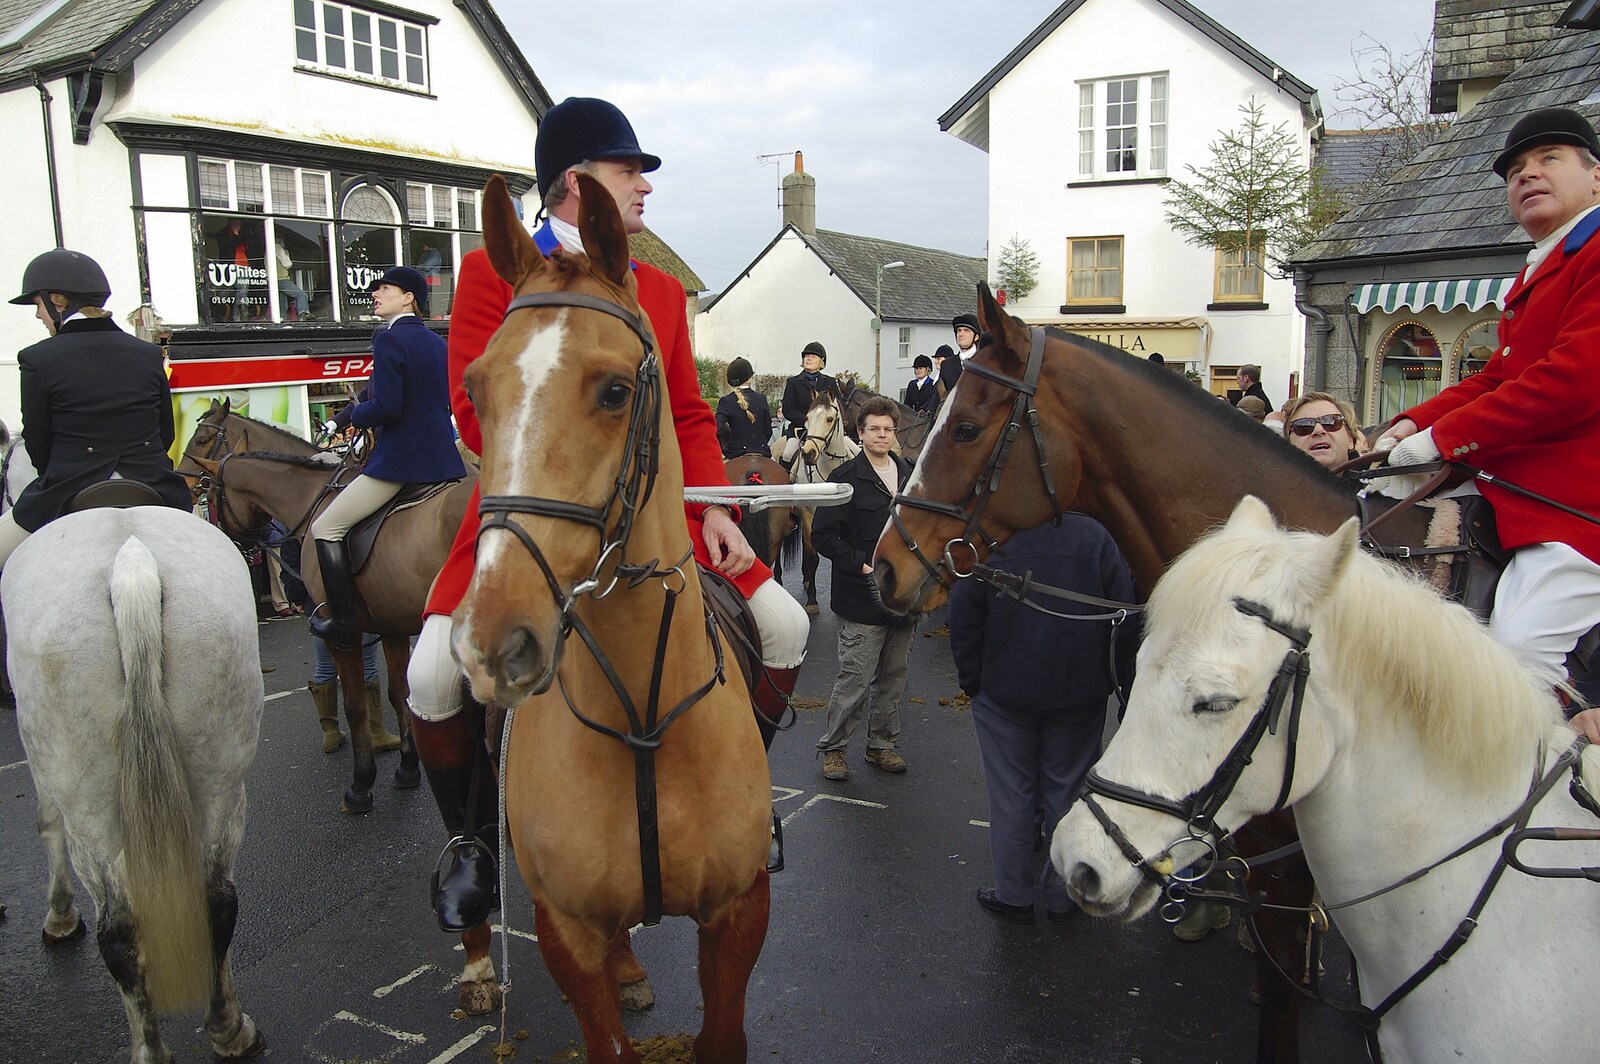 A load of horses outside the Spar from A Boxing Day Hunt, Chagford, Devon - 26th December 2007